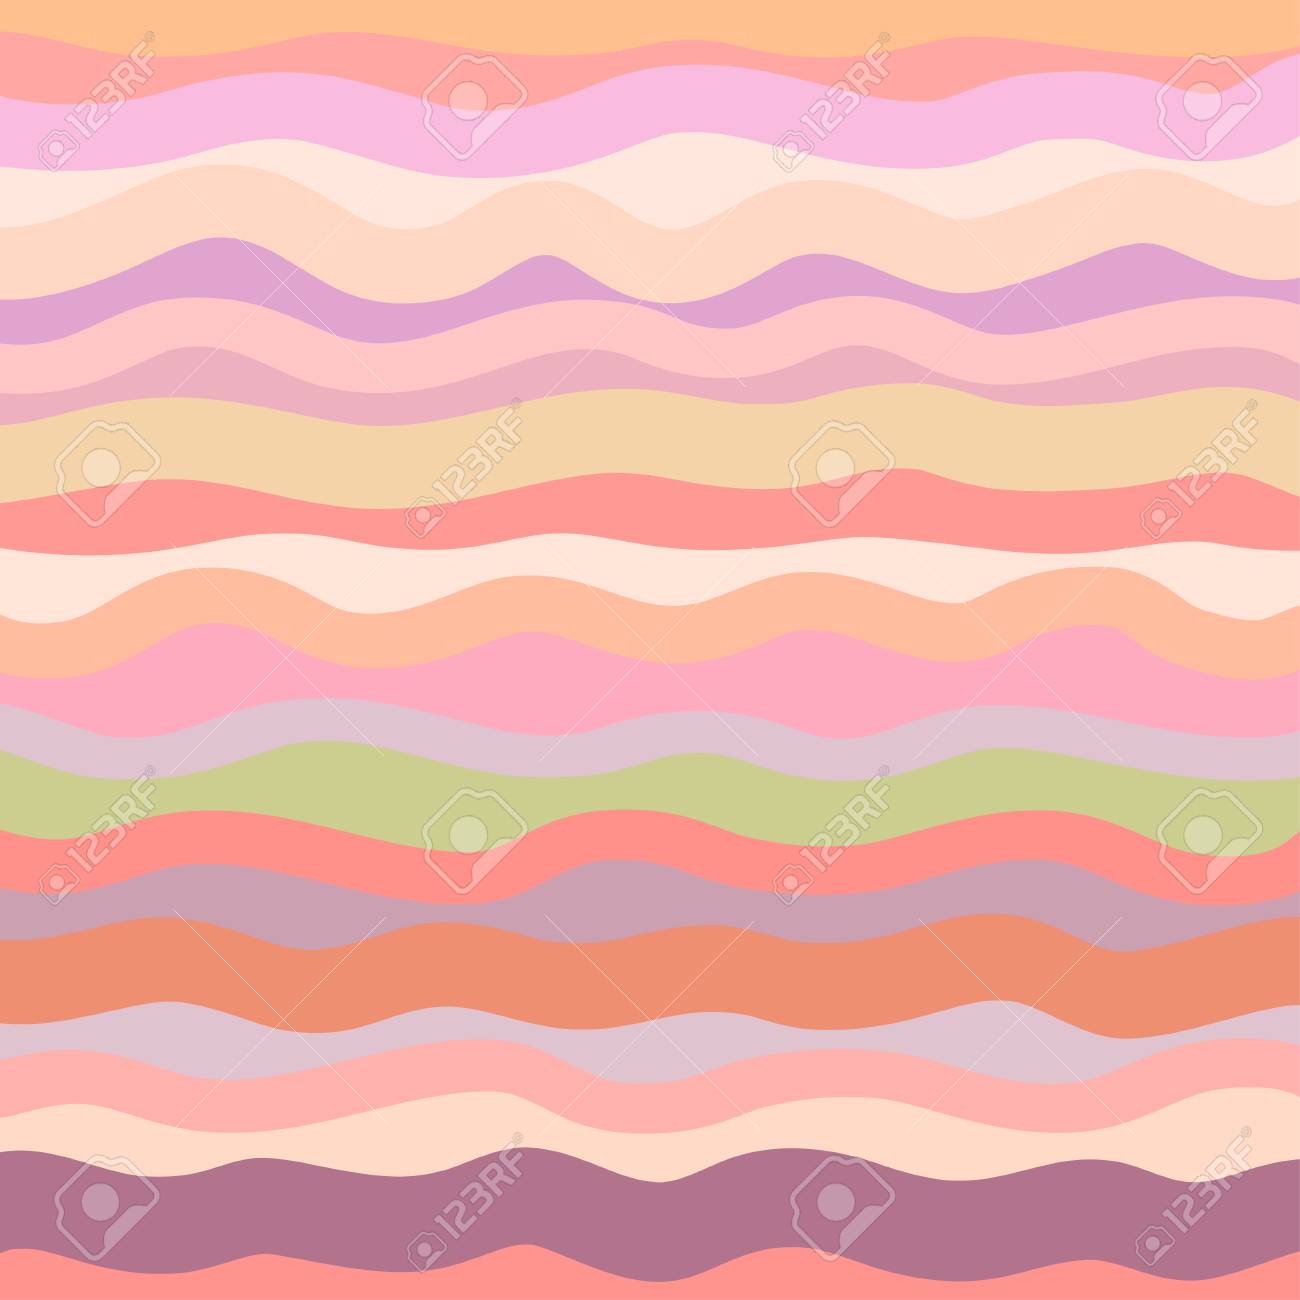 Abstract Square Wallpaper Of The Surface Cute Waved Background